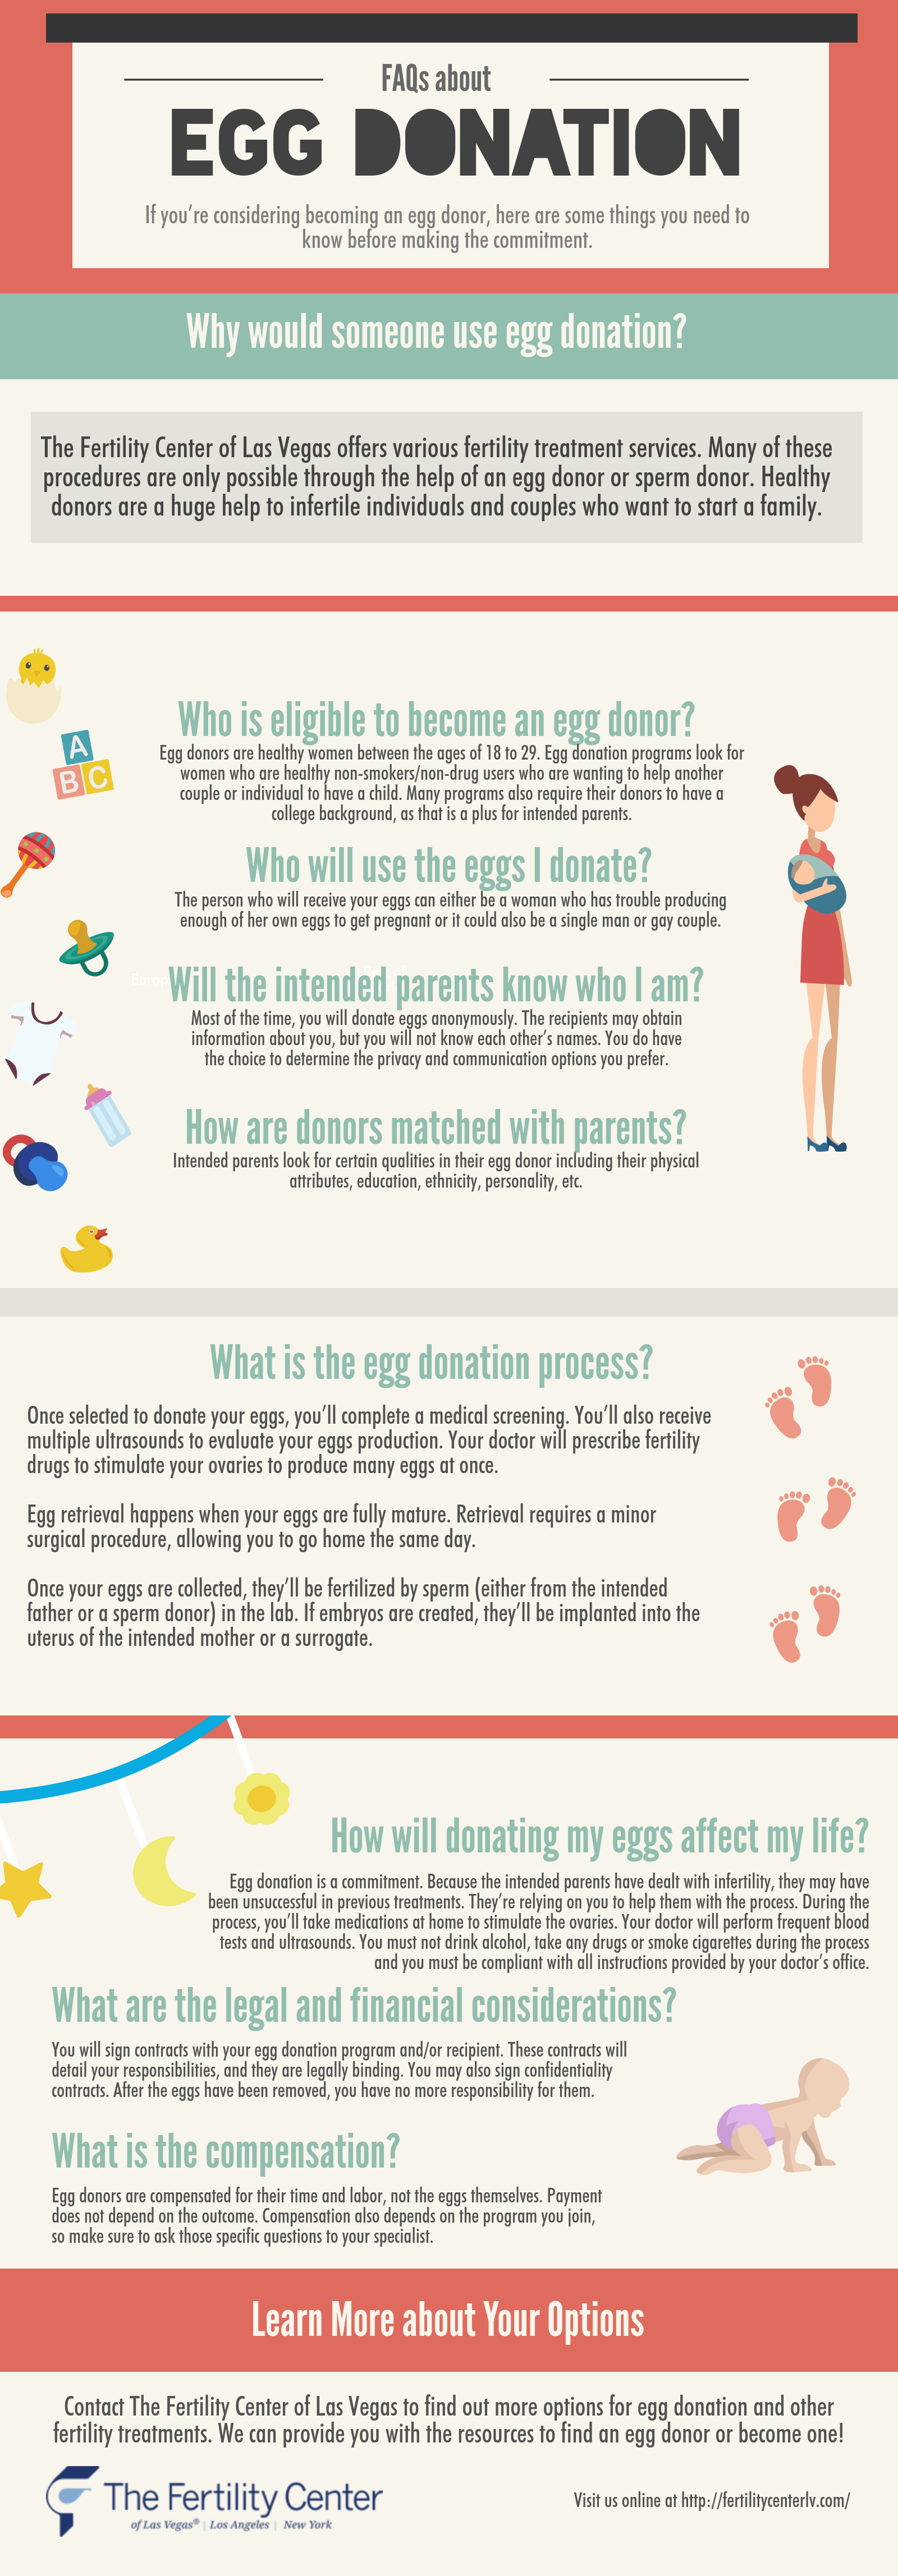 FAQS about egg donation